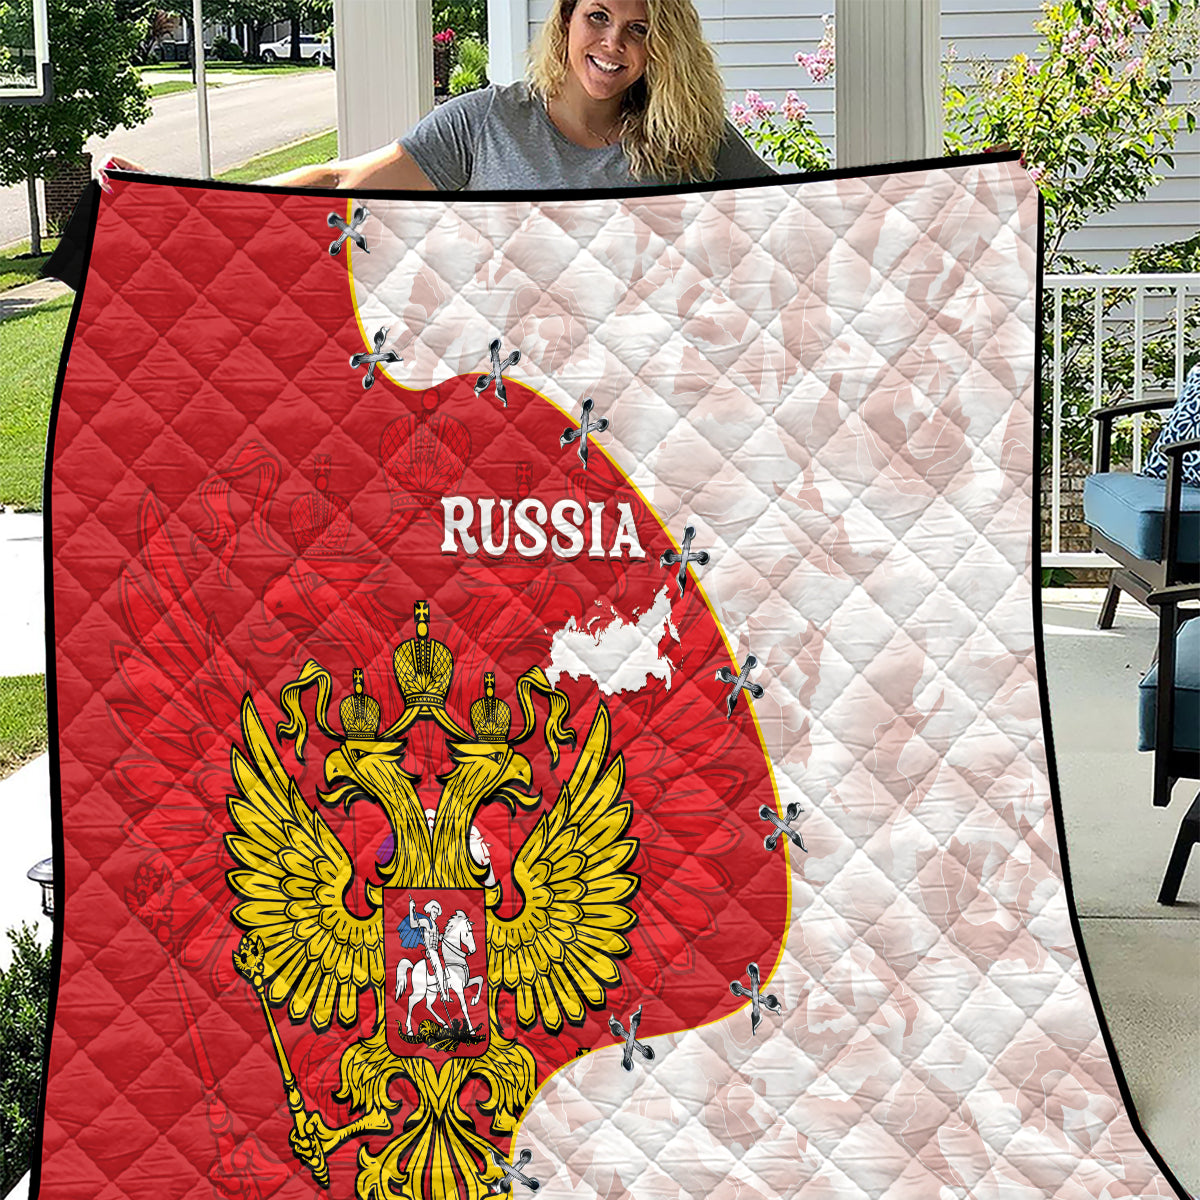 Russia Independence Day Quilt Coat Of Arms With Map